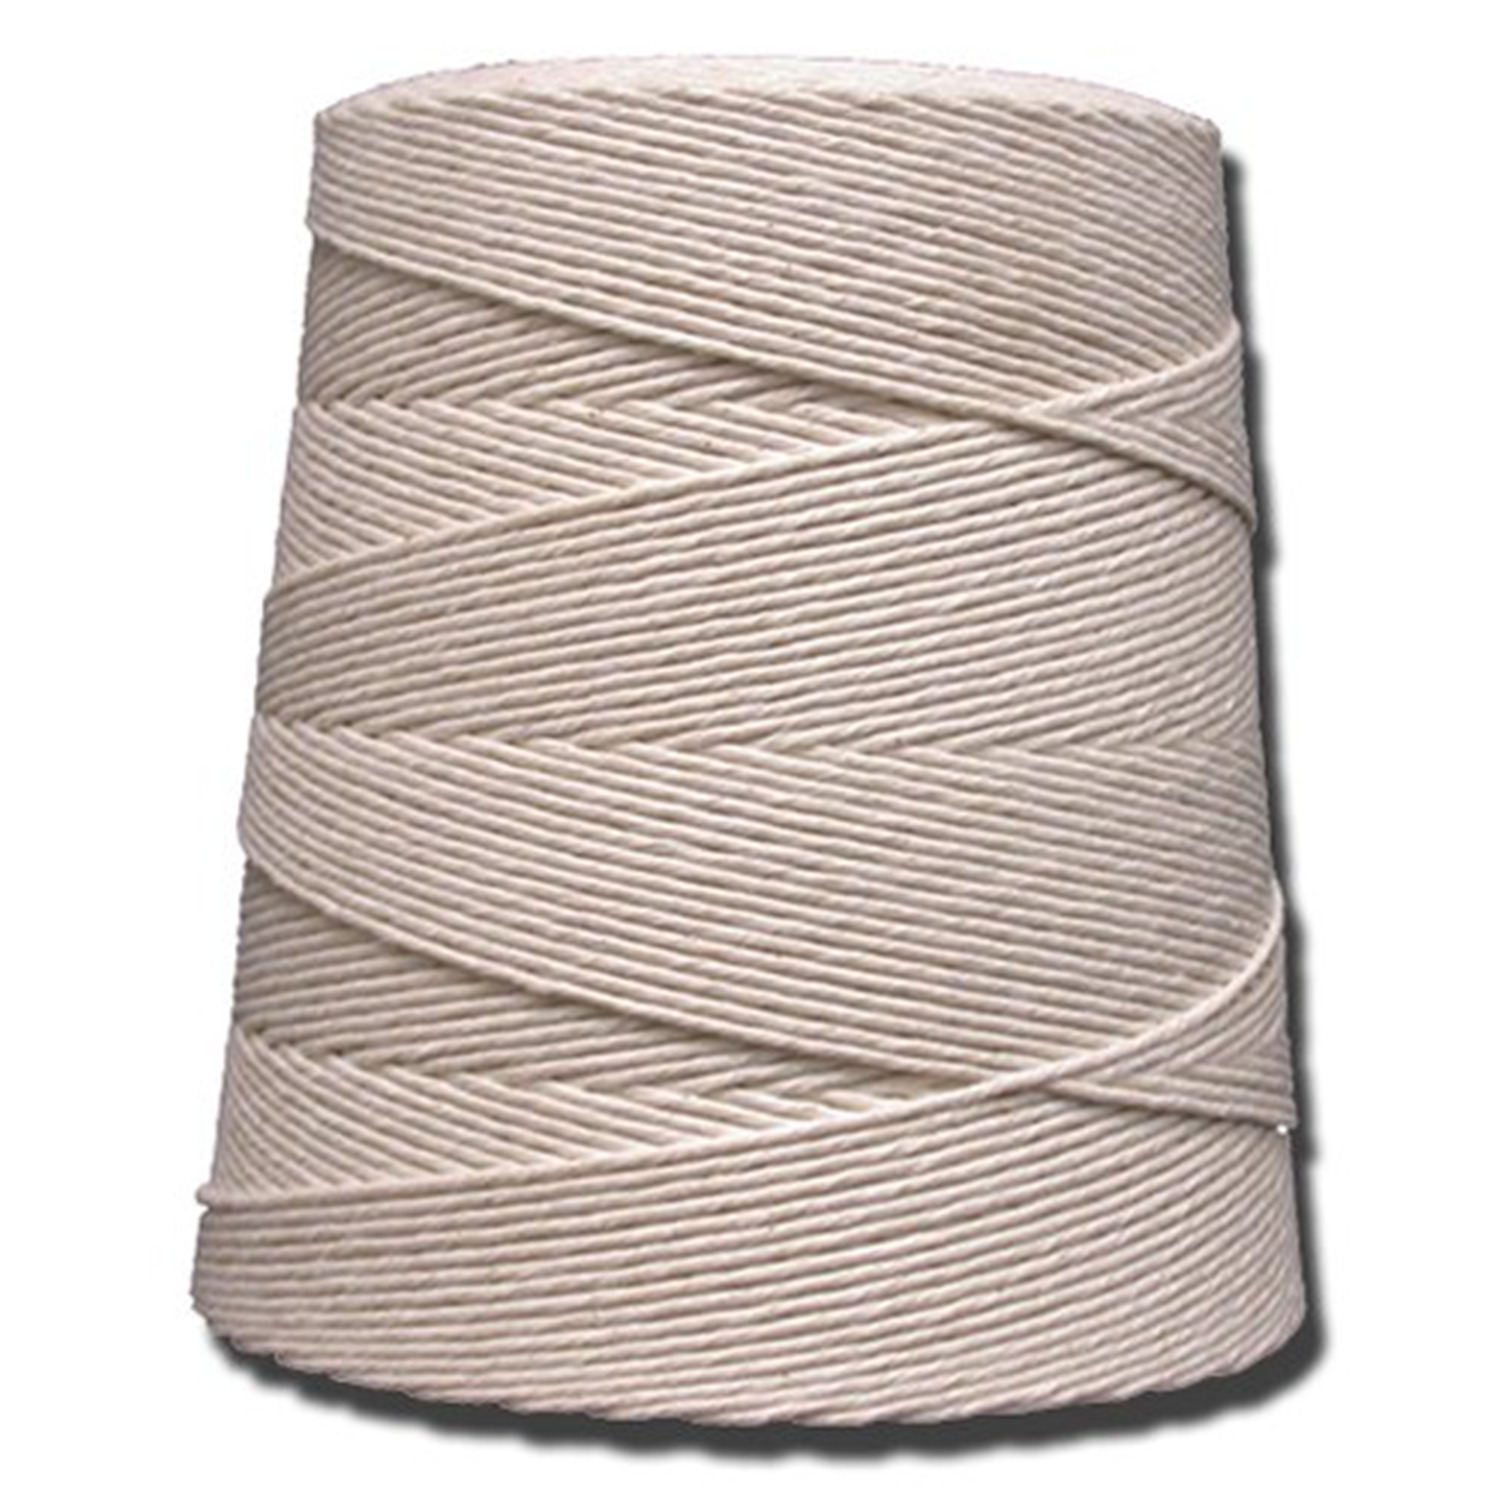 T.W. Evans Cordage  20 Poly Cotton Twine with 2.5 Pound Cone with 2250 ft. - image 1 of 1